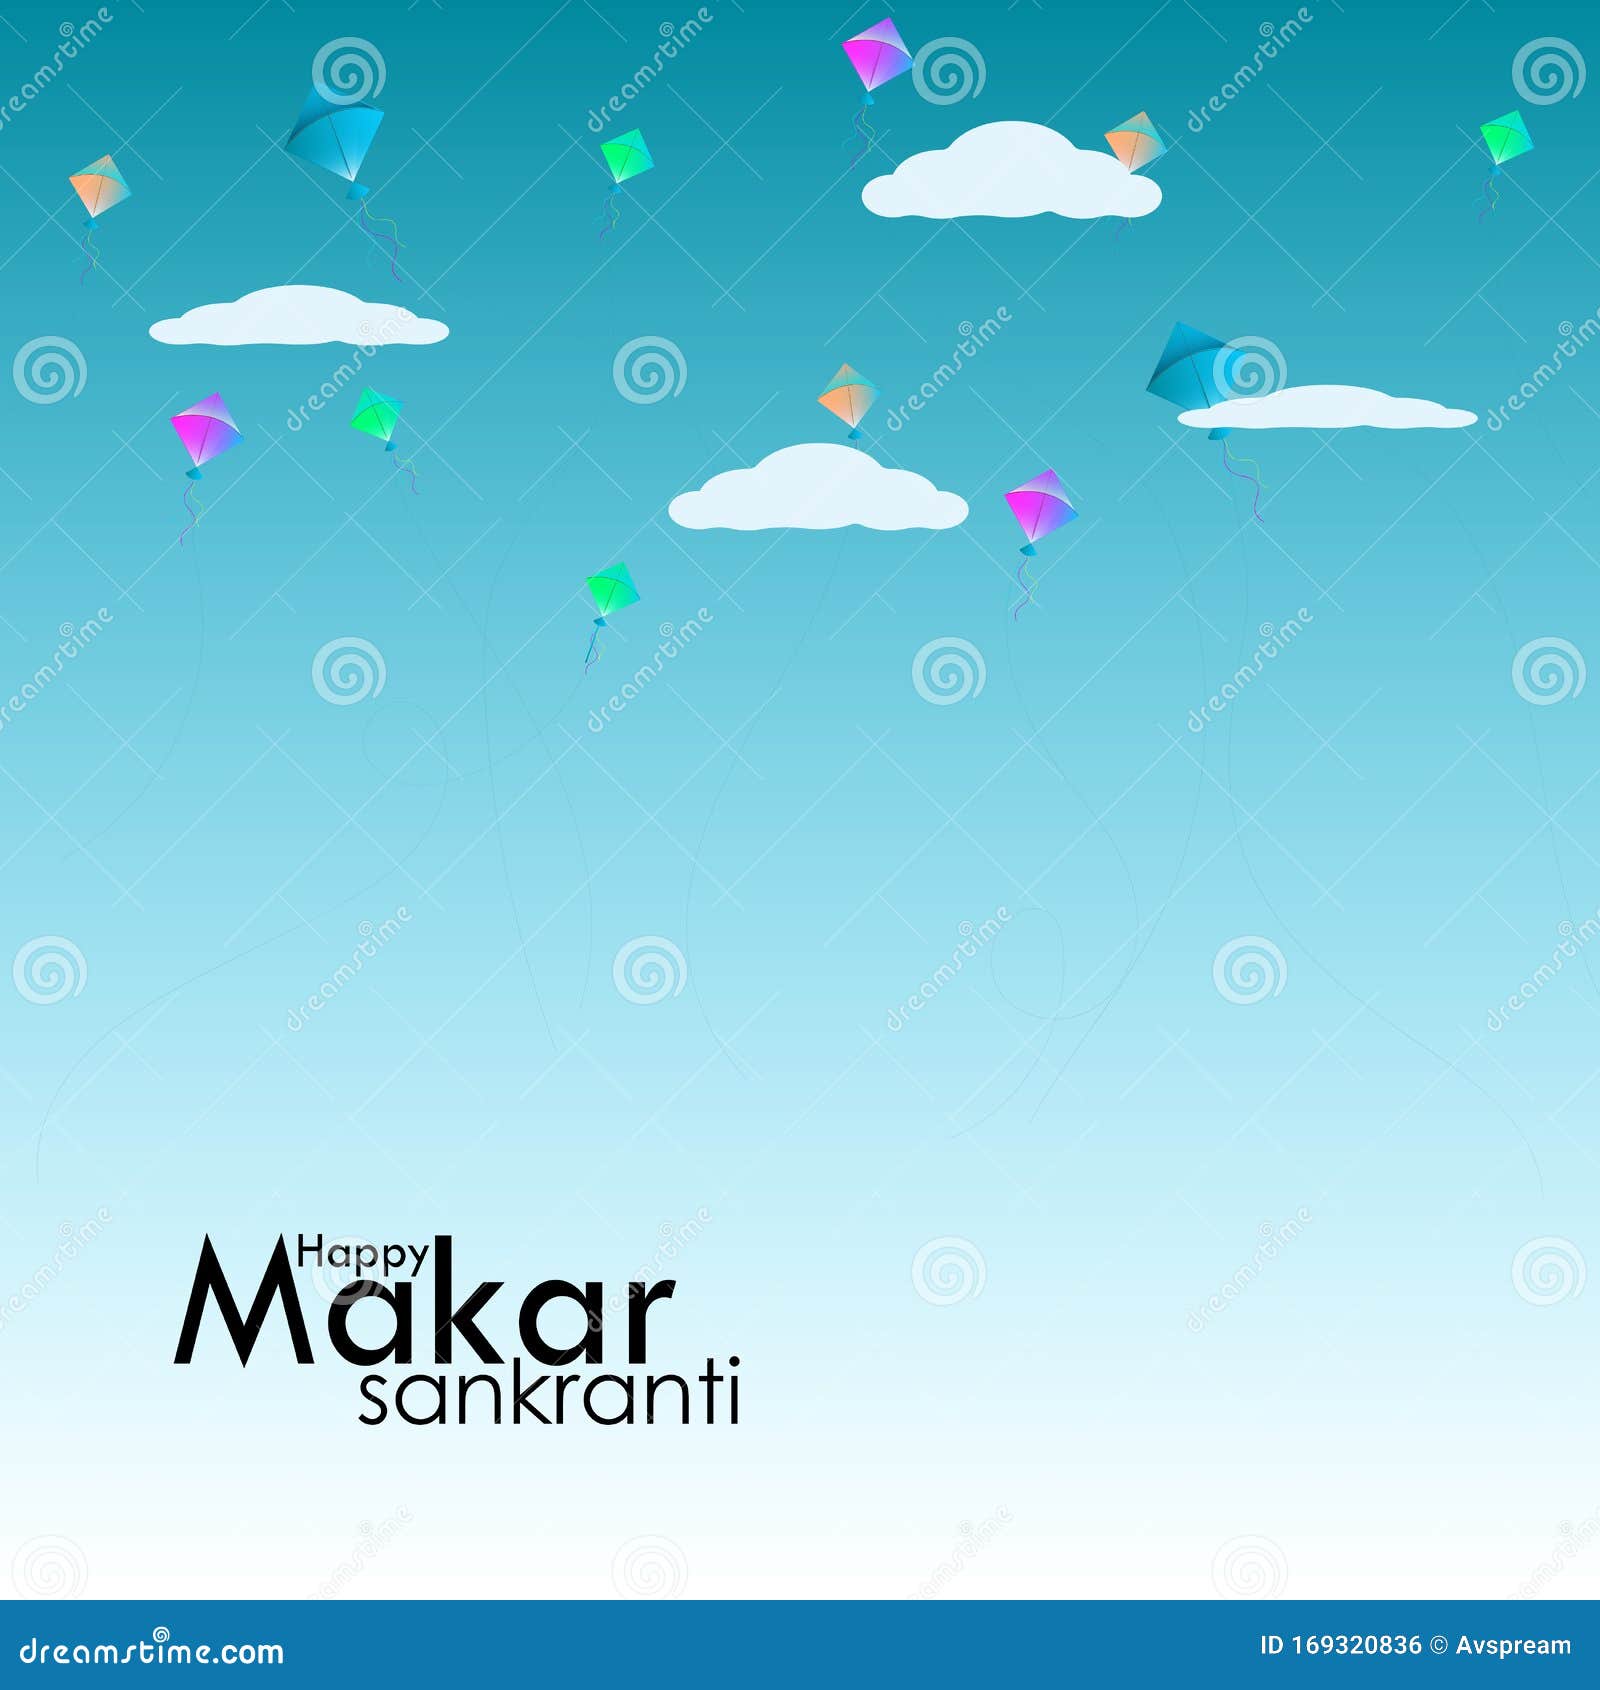 Happy Makar Sankranti Poster Design with Illustration of Colorful Kites  Flying Sunny Weather Background Stock Vector - Illustration of design,  background: 169320836